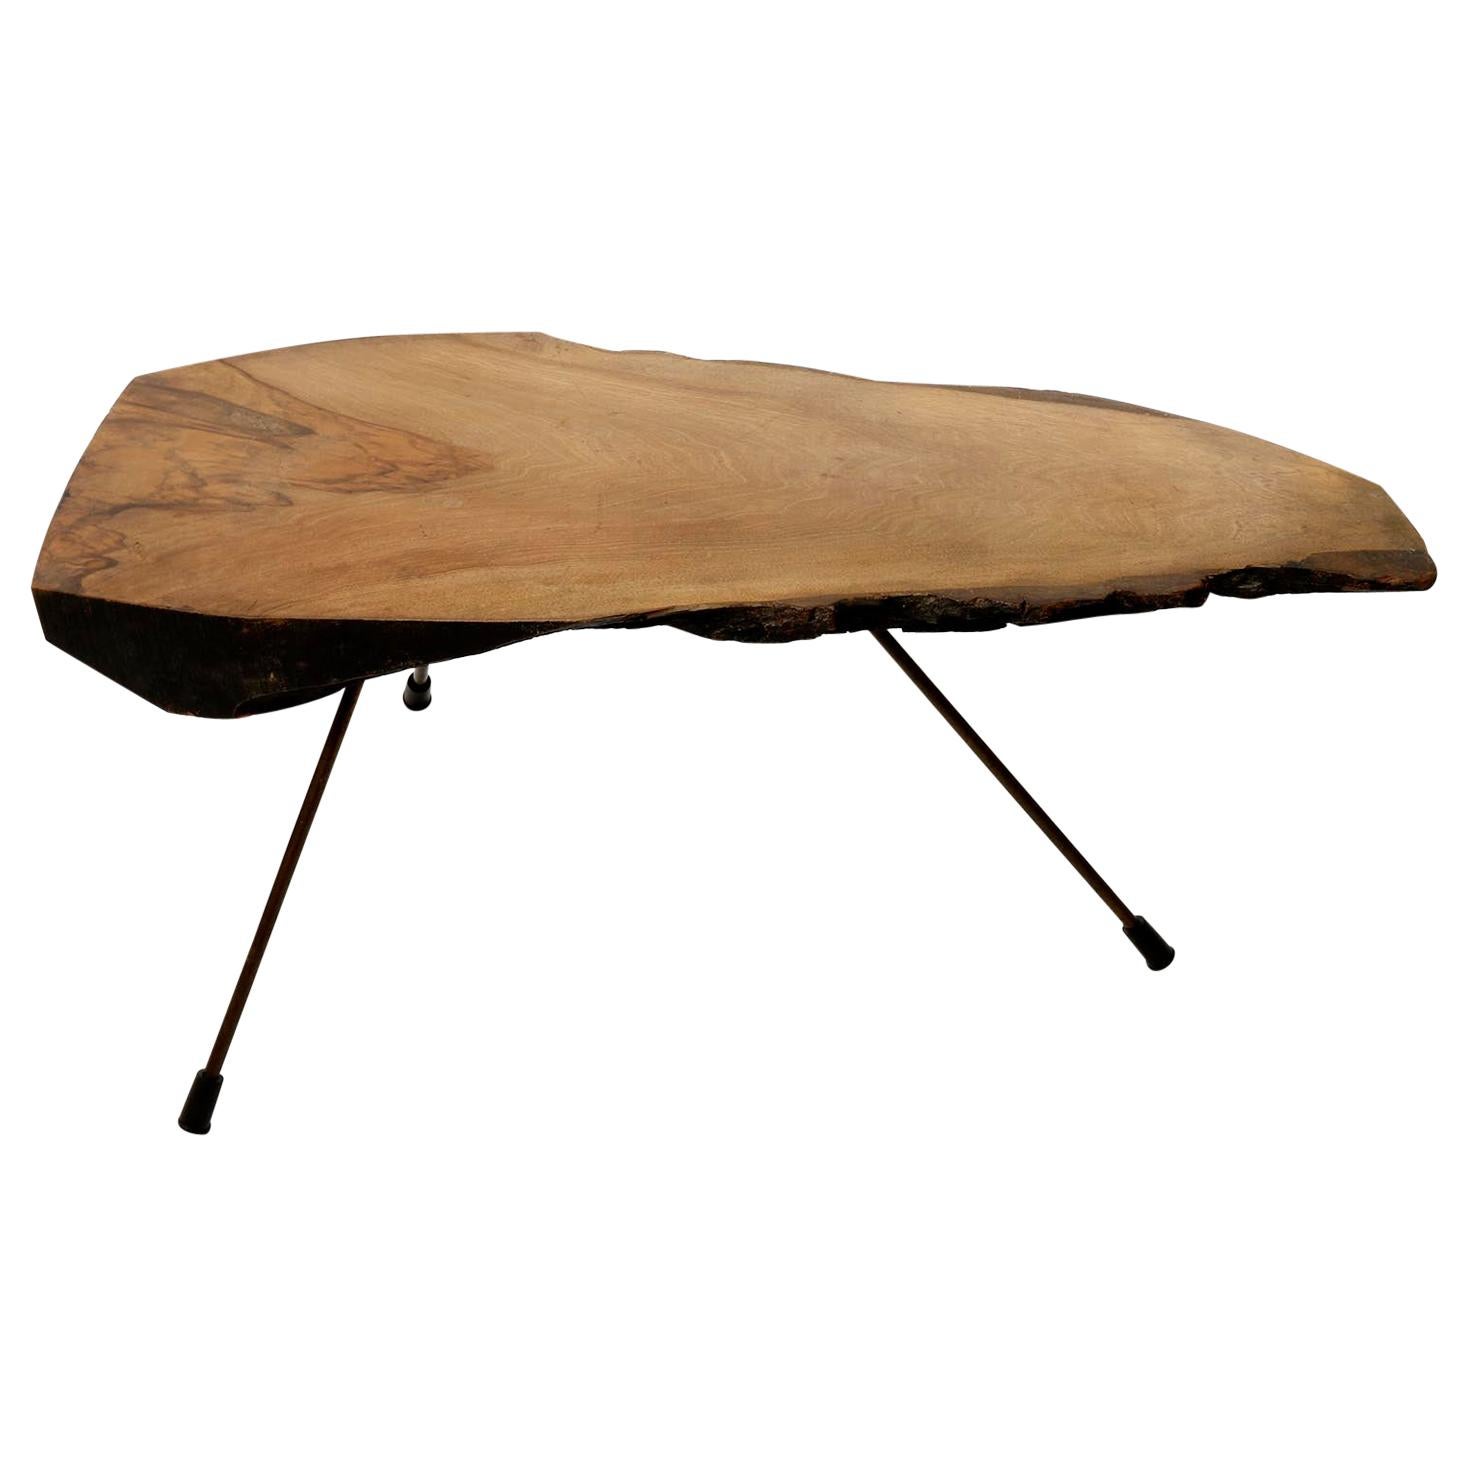 Organic Tree Trunk Coffee Table, Carl Auböck, Walnut Wood Patinated Brass, 1950s For Sale